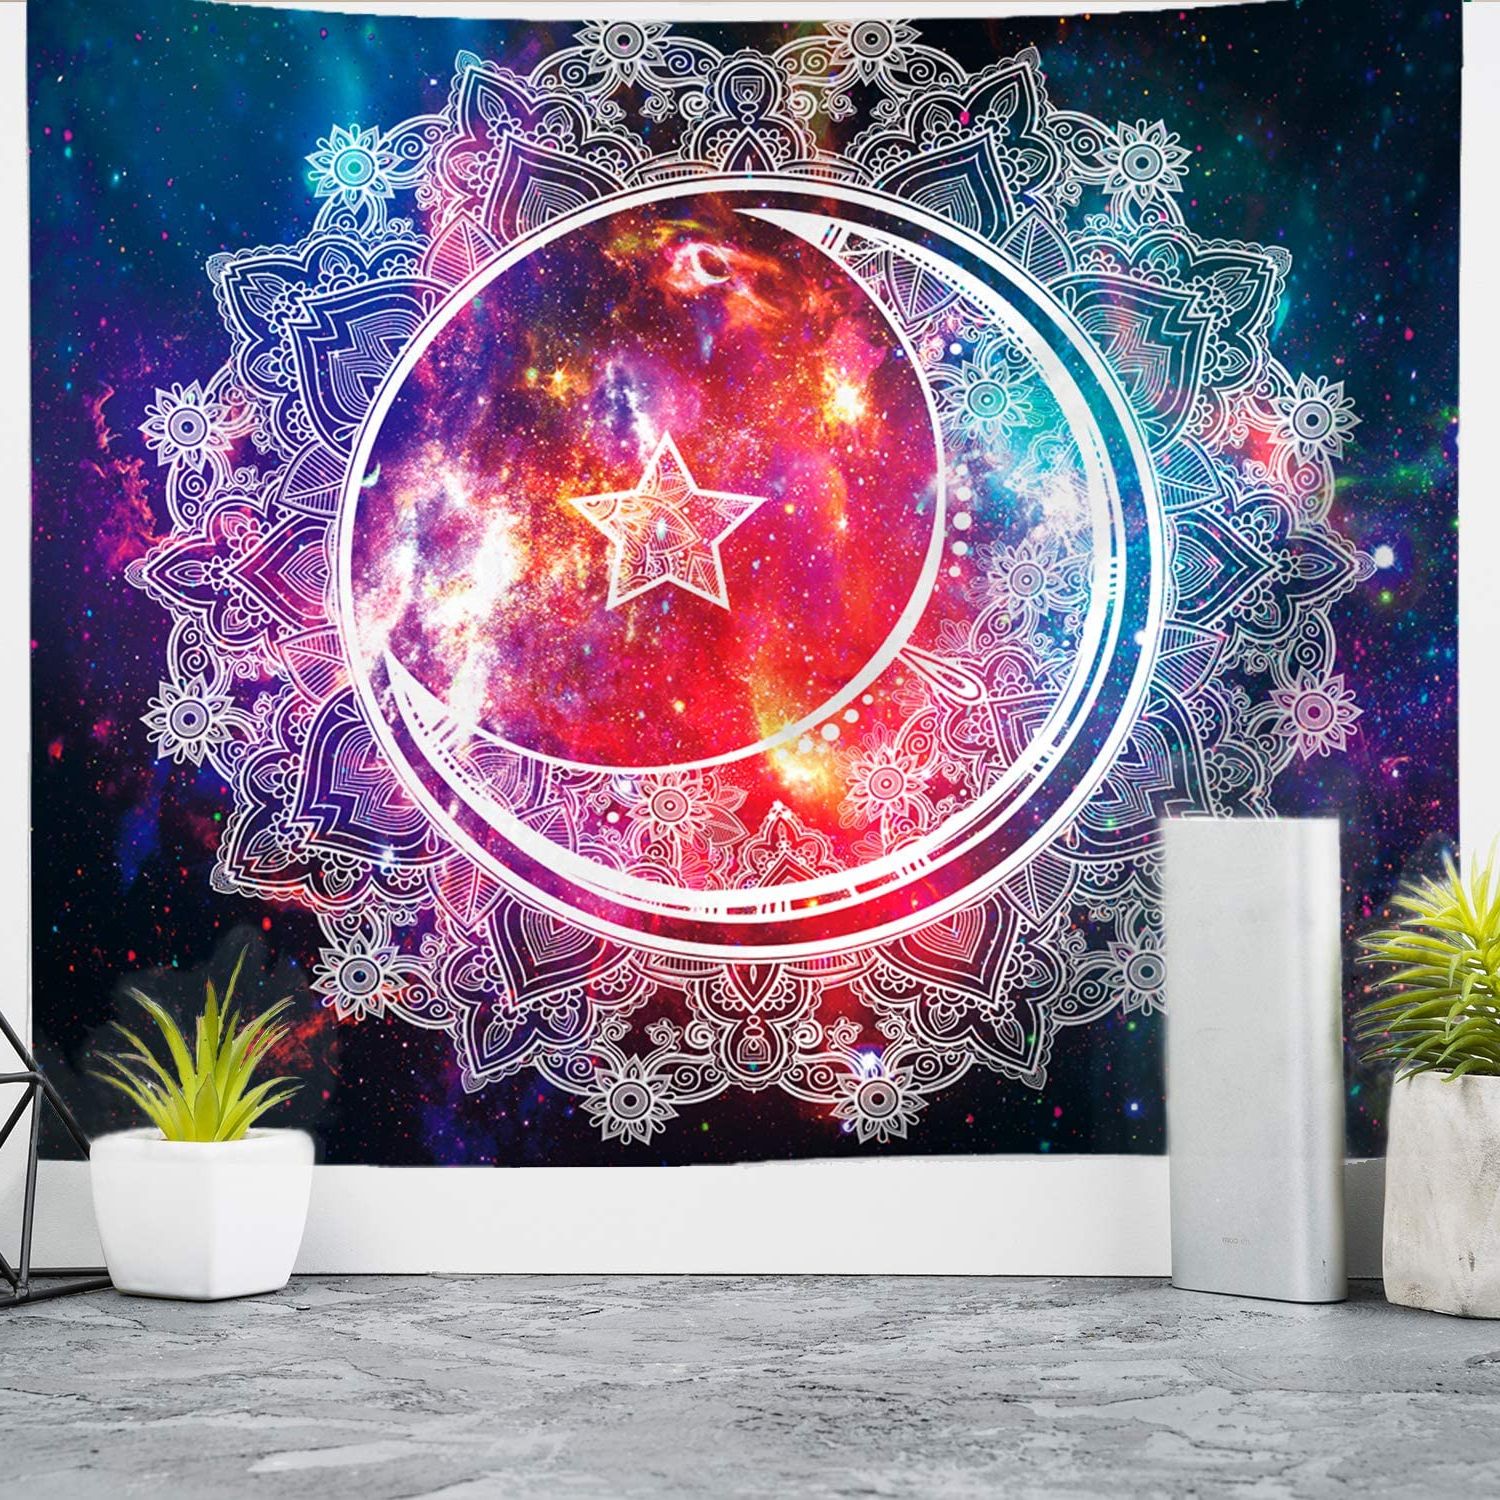 Nidoul Psychedelic Tapestry Wall Hanging, Boho Mandala Tapestry, Celestial  Starry Sky Wall Tapestry, Wall Art Decoration For Bedroom Living Room Dorm, With Most Current Blended Fabric Wall Hangings With Hanging Accessories Included (View 13 of 20)